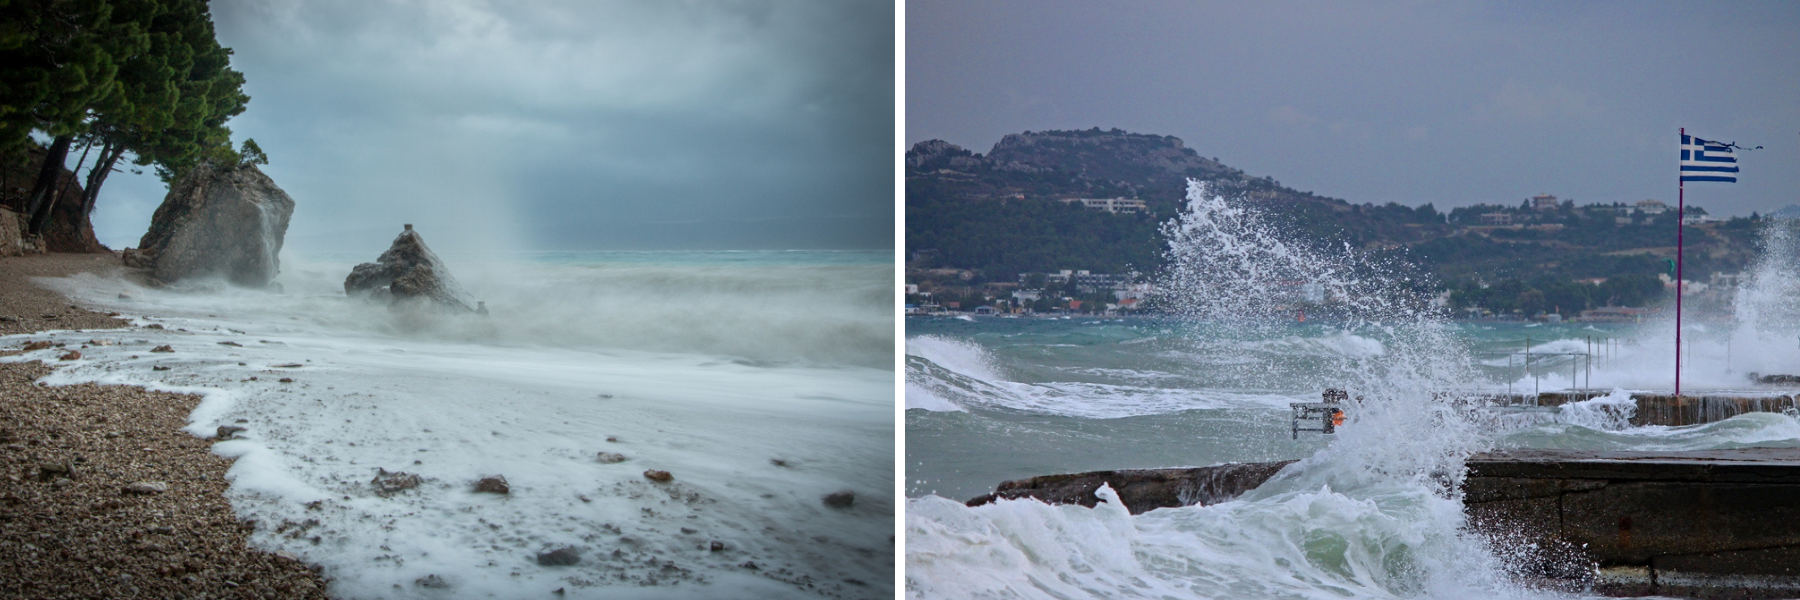 In Croatia and Greece, you may encounter unpleasant winds and weather.